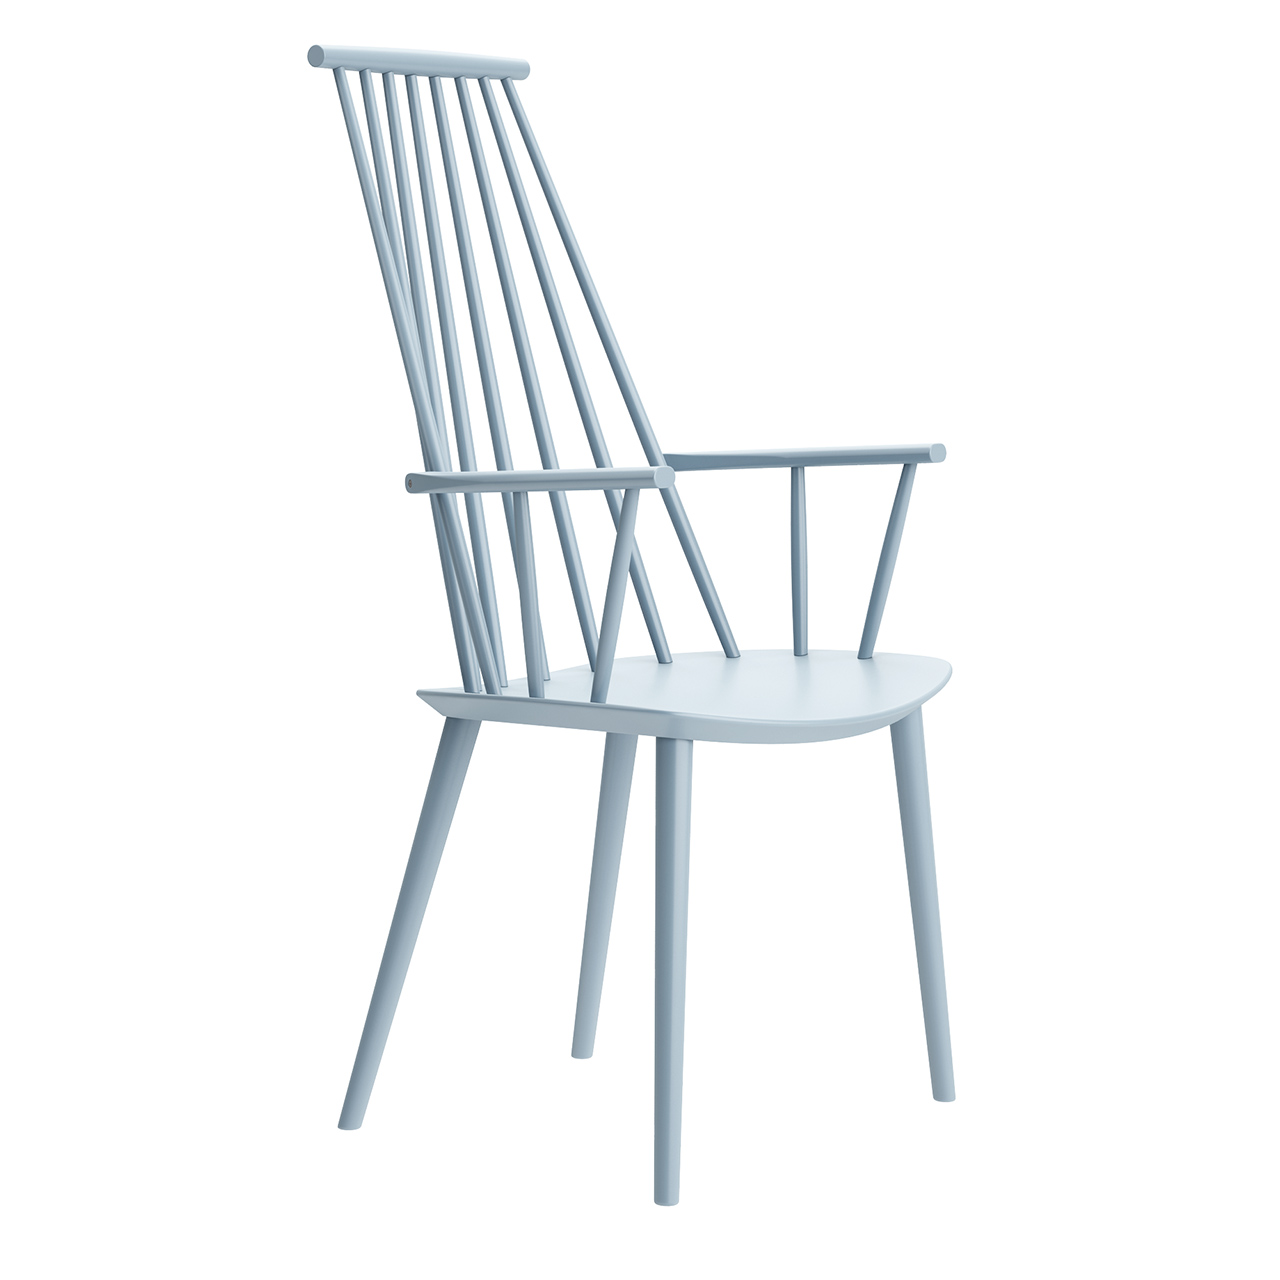 J110 Lounge Chair by Hay